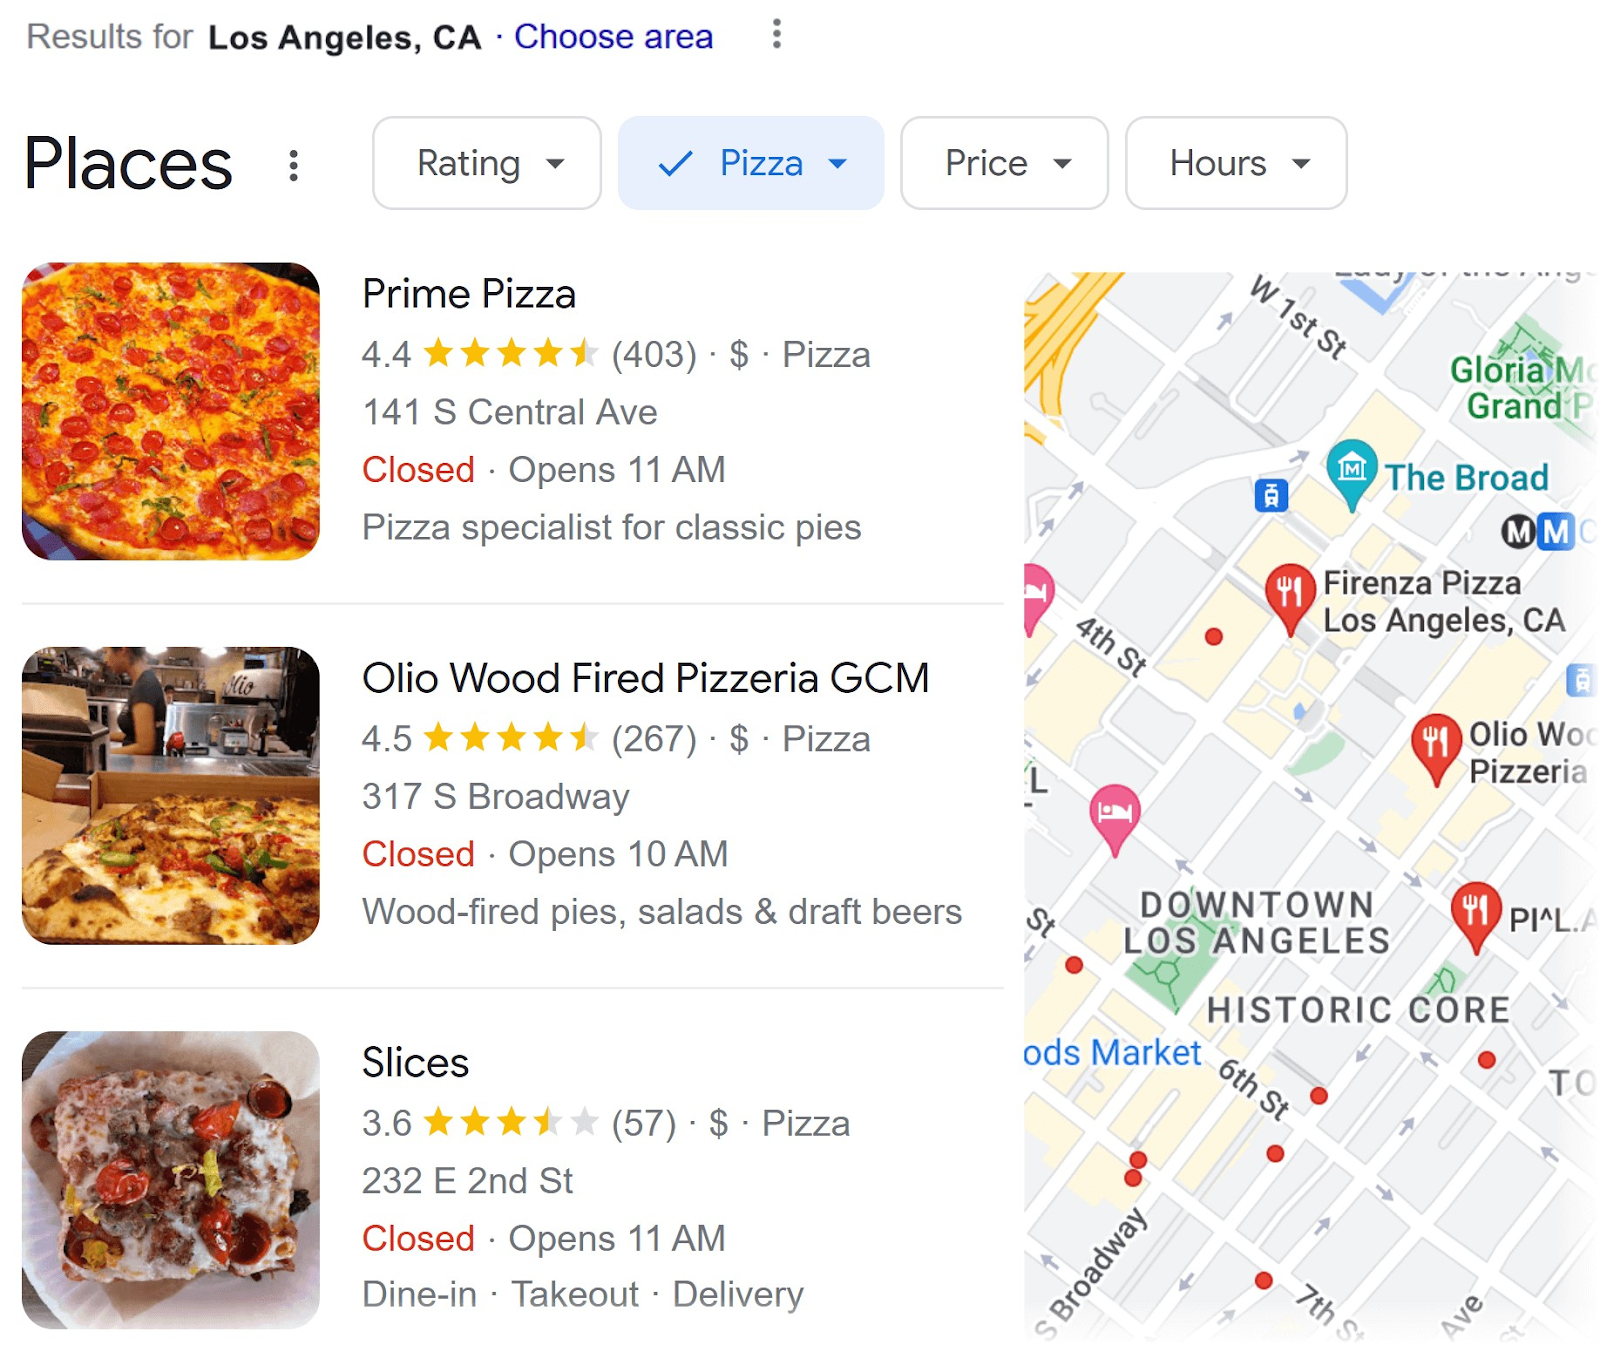 Google results for "pizza near me" query in Los Angeles, CA